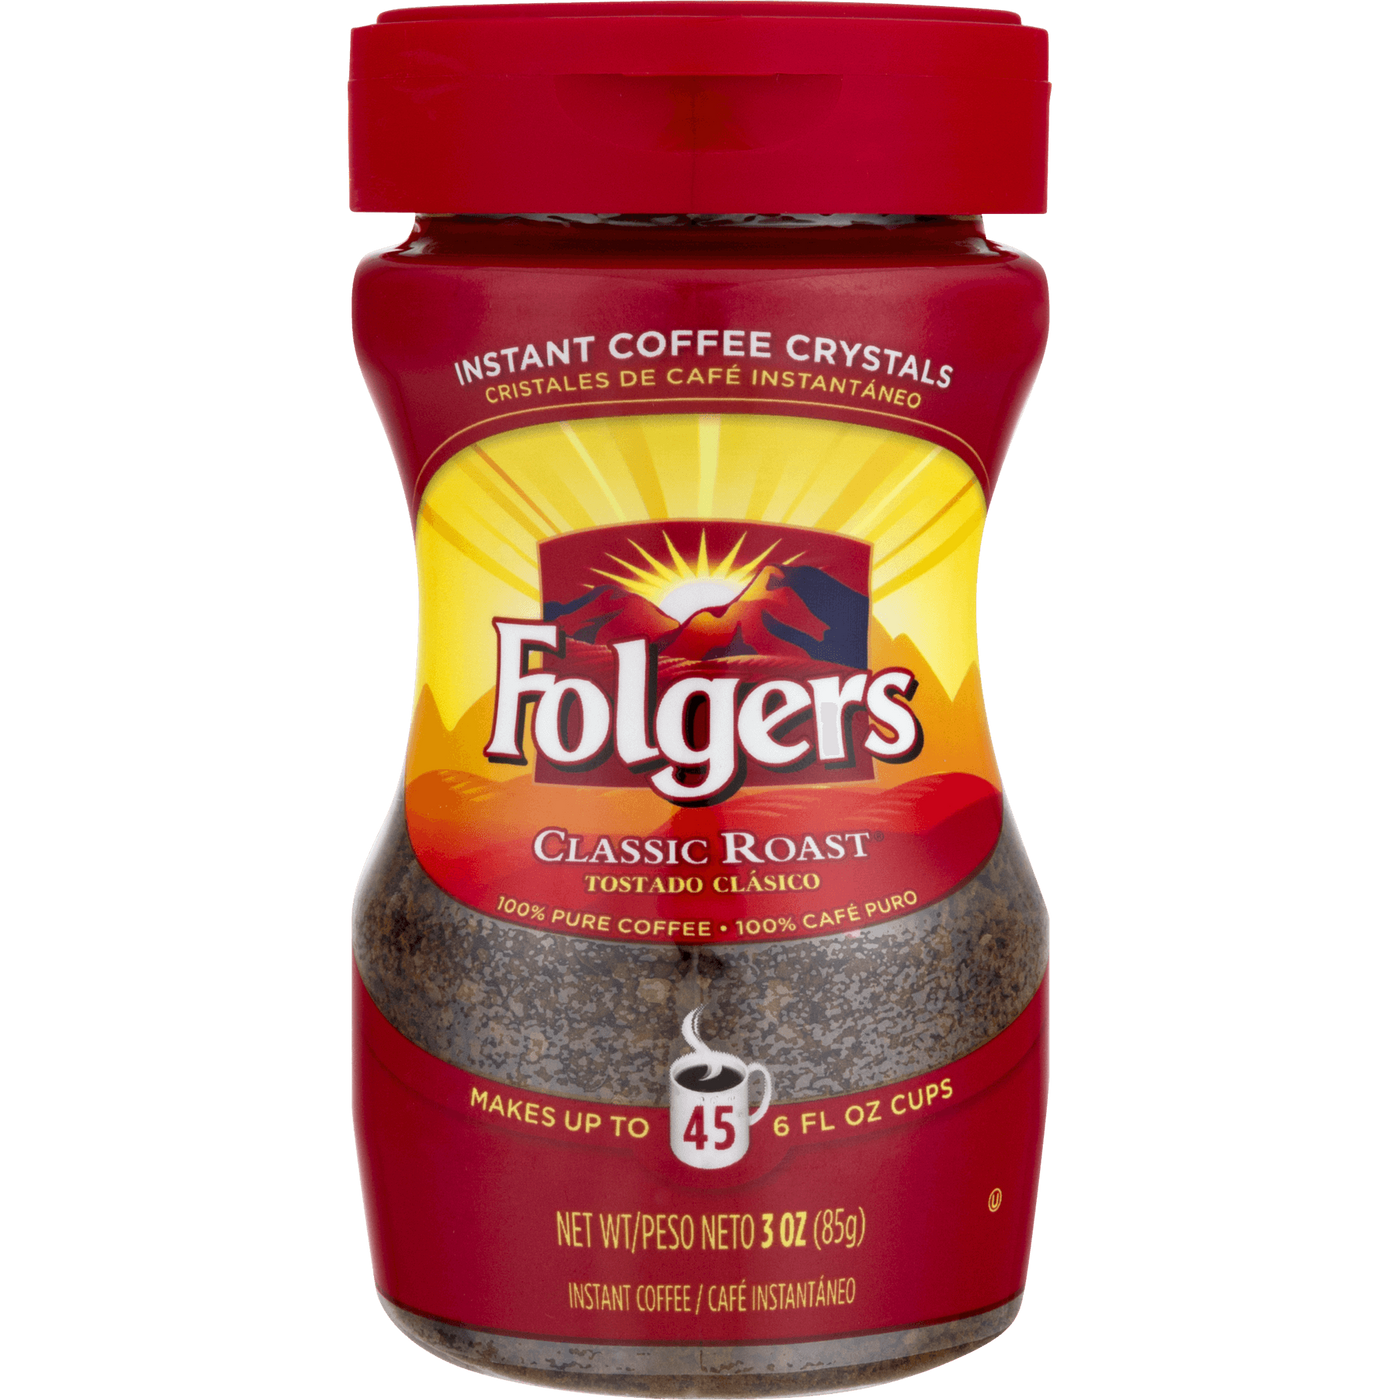 How Much Caffeine In Instant Coffee Folgers : Cafe Bustelo ...